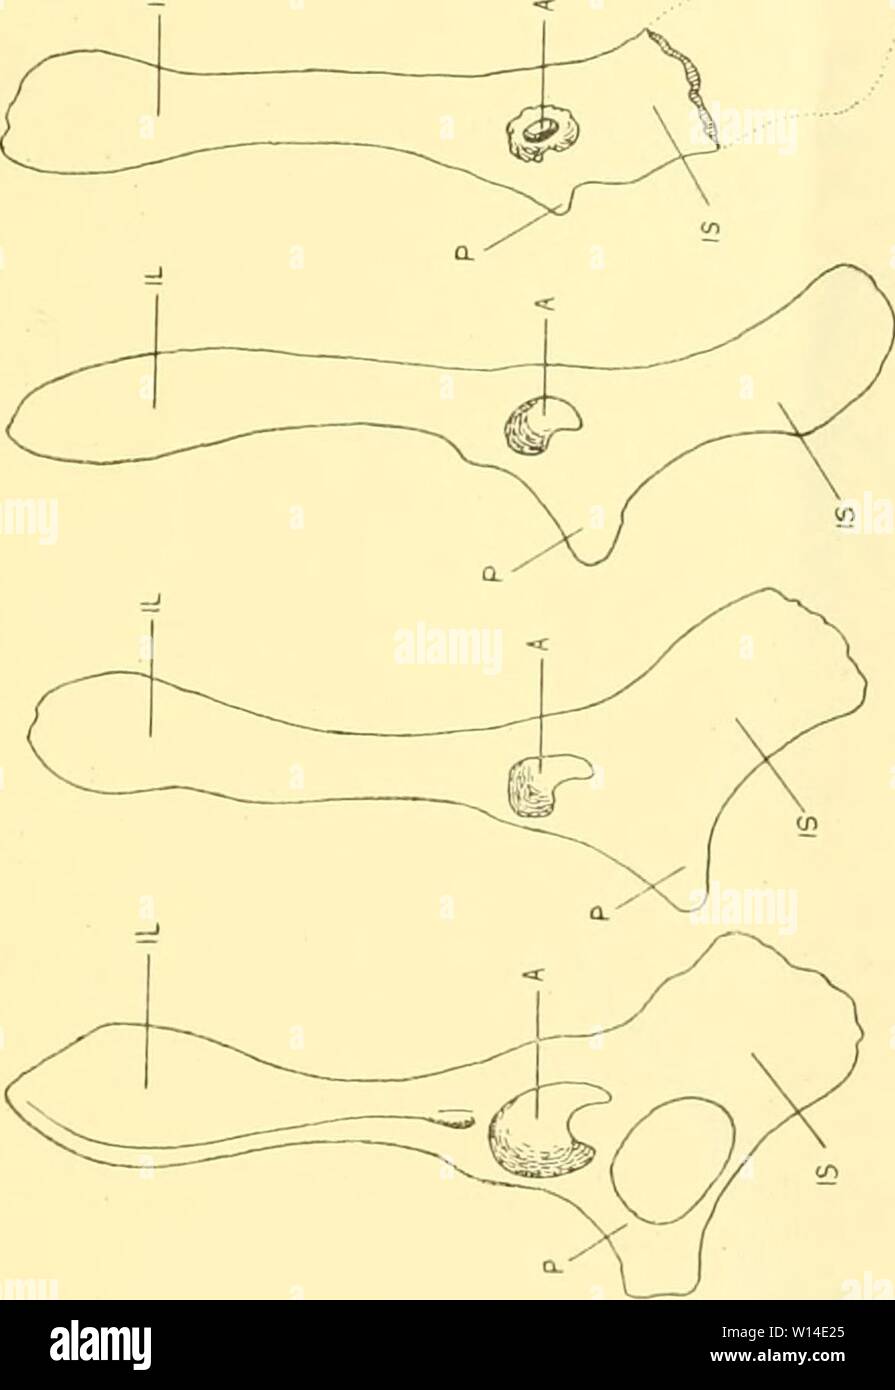 Archive image from page 10 of Die Morphologie der Hüftbeinrudimente der. Die Morphologie der HÃ¼ftbeinrudimente der Cetaceen . diemorphologiede00abel Year: 1907  x e :3 M X h â '&lt;    bo E 60 so E r i X Tr O. e :-  = s â- âi 'O c: = â - a D 2 I SÂ° Â»  g T i| ' S :S M 'S ' Â£ o S Ja H so u c 3 M o c o S) Â« .5 &gt; â o r O c x: o o 1  1 .5 tb- Ã¤ g 1 2 3 C o o t Ct. b & C C tu tu c t/3 Â« fct 2 o i2J 6 o 'c? s CO to U 1 1 M 1- fe o &gt; &gt; â¢5Â« c OJ 3 e Â§ H I C O a S Â£ d t rt â Ti r-  C Â£ â  fcD I â¢Â§  V&gt; -o u '' &gt; o â' Â«&gt; -1 r. x U tV â¢f to I  B -Â» 3 Â§ '  B  od ,â¢- a&g Stock Photo